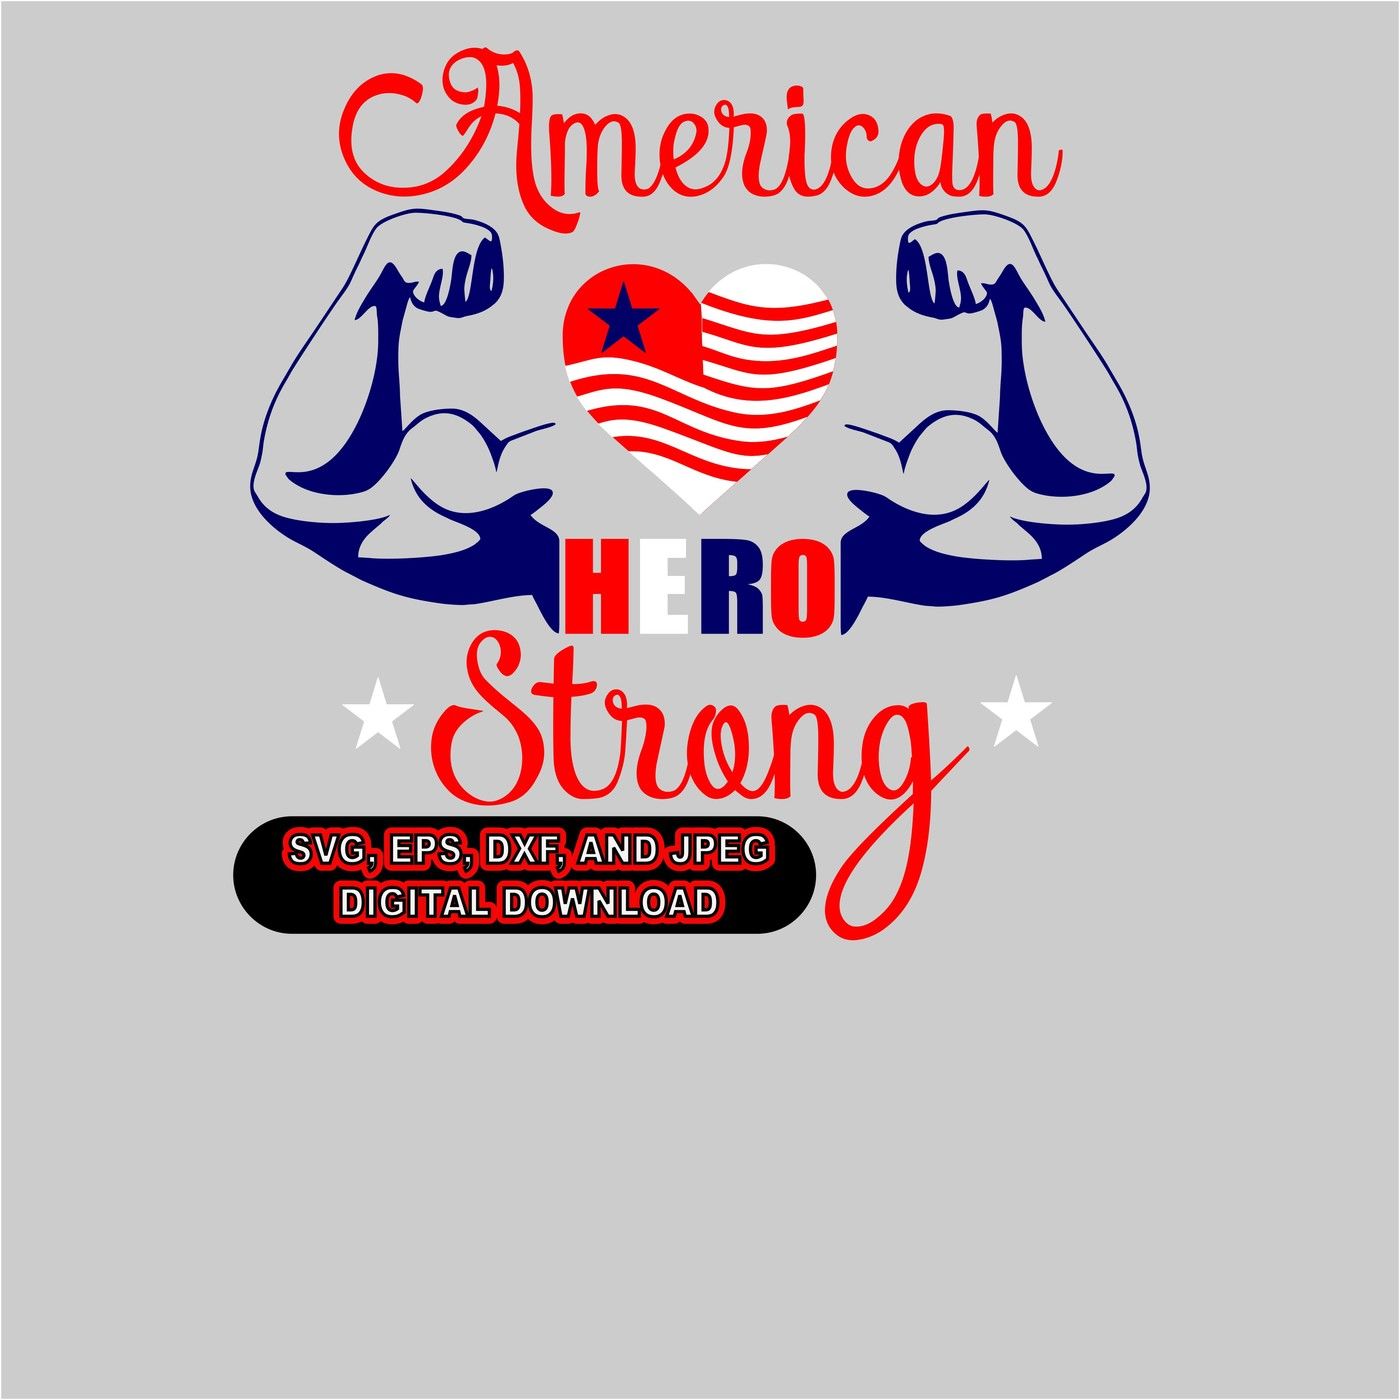 ori 75973 5300dd6c396a97fa40b441859e9e20d5f9386fcd 4th of july svg dxf eps and jpg files for cutting machines cameo or cricut july 4th svg america svg patriotic svg